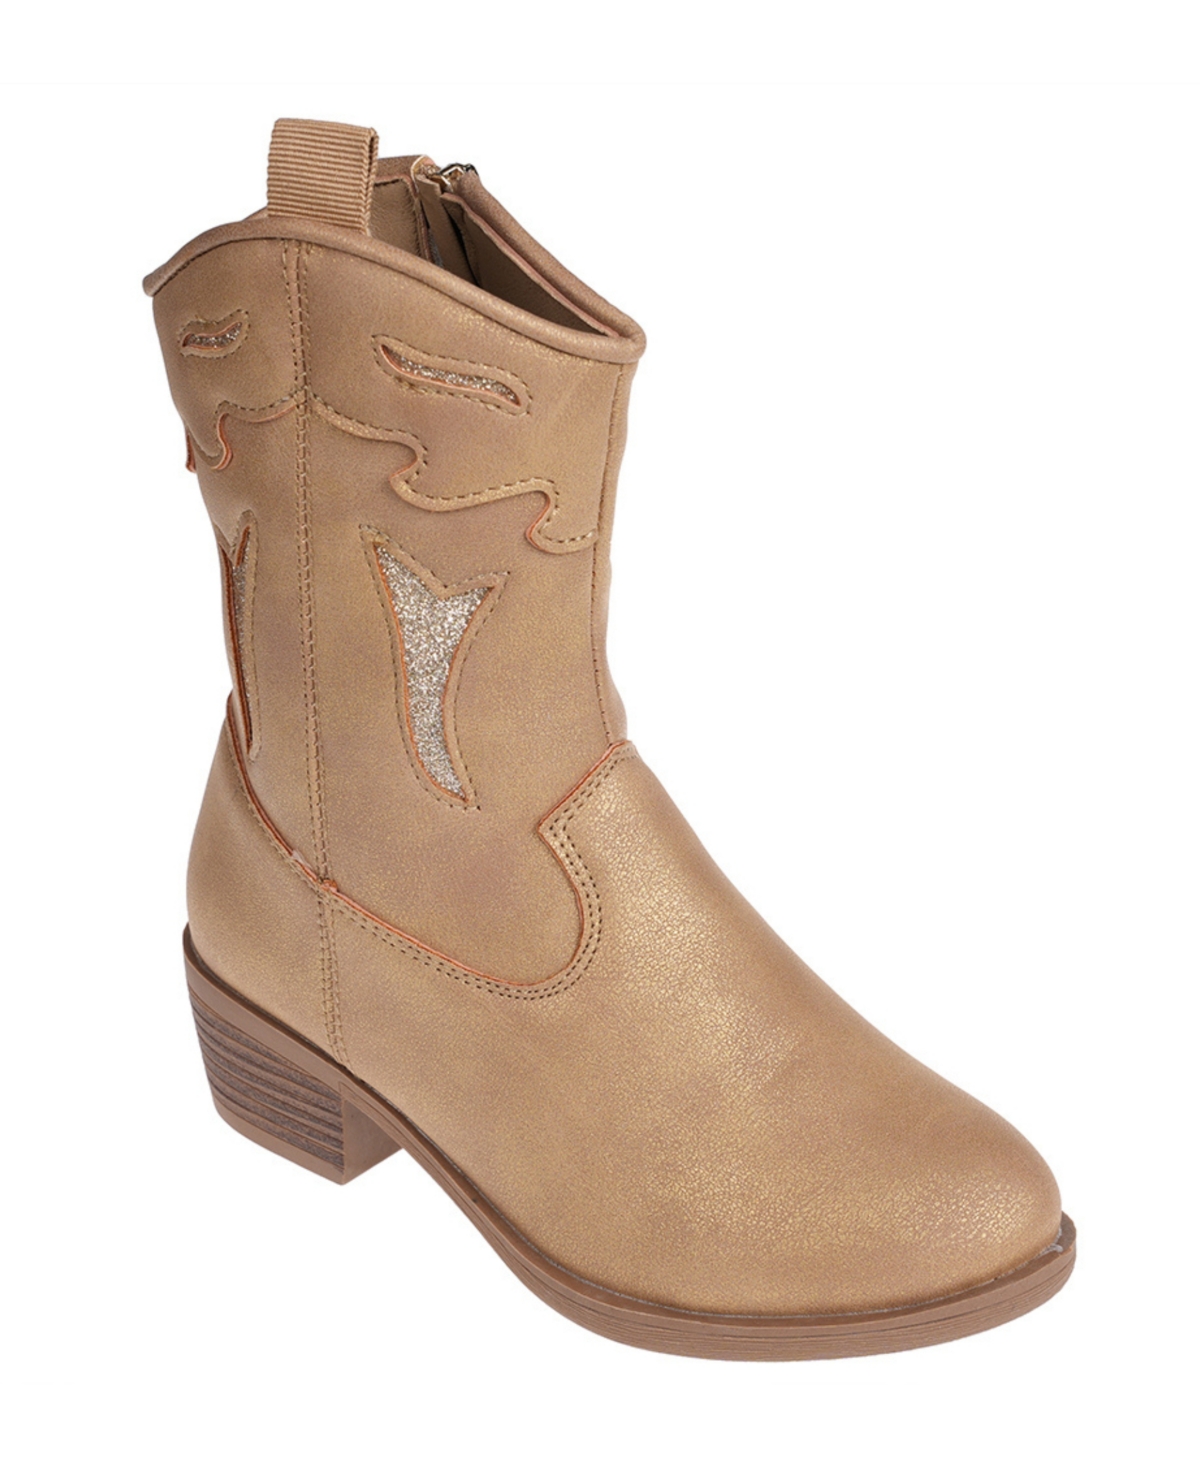 VINCE CAMUTO BIG GIRLS MID CALF GLITTER CLASSIC WESTERN COWGIRL BOOTS